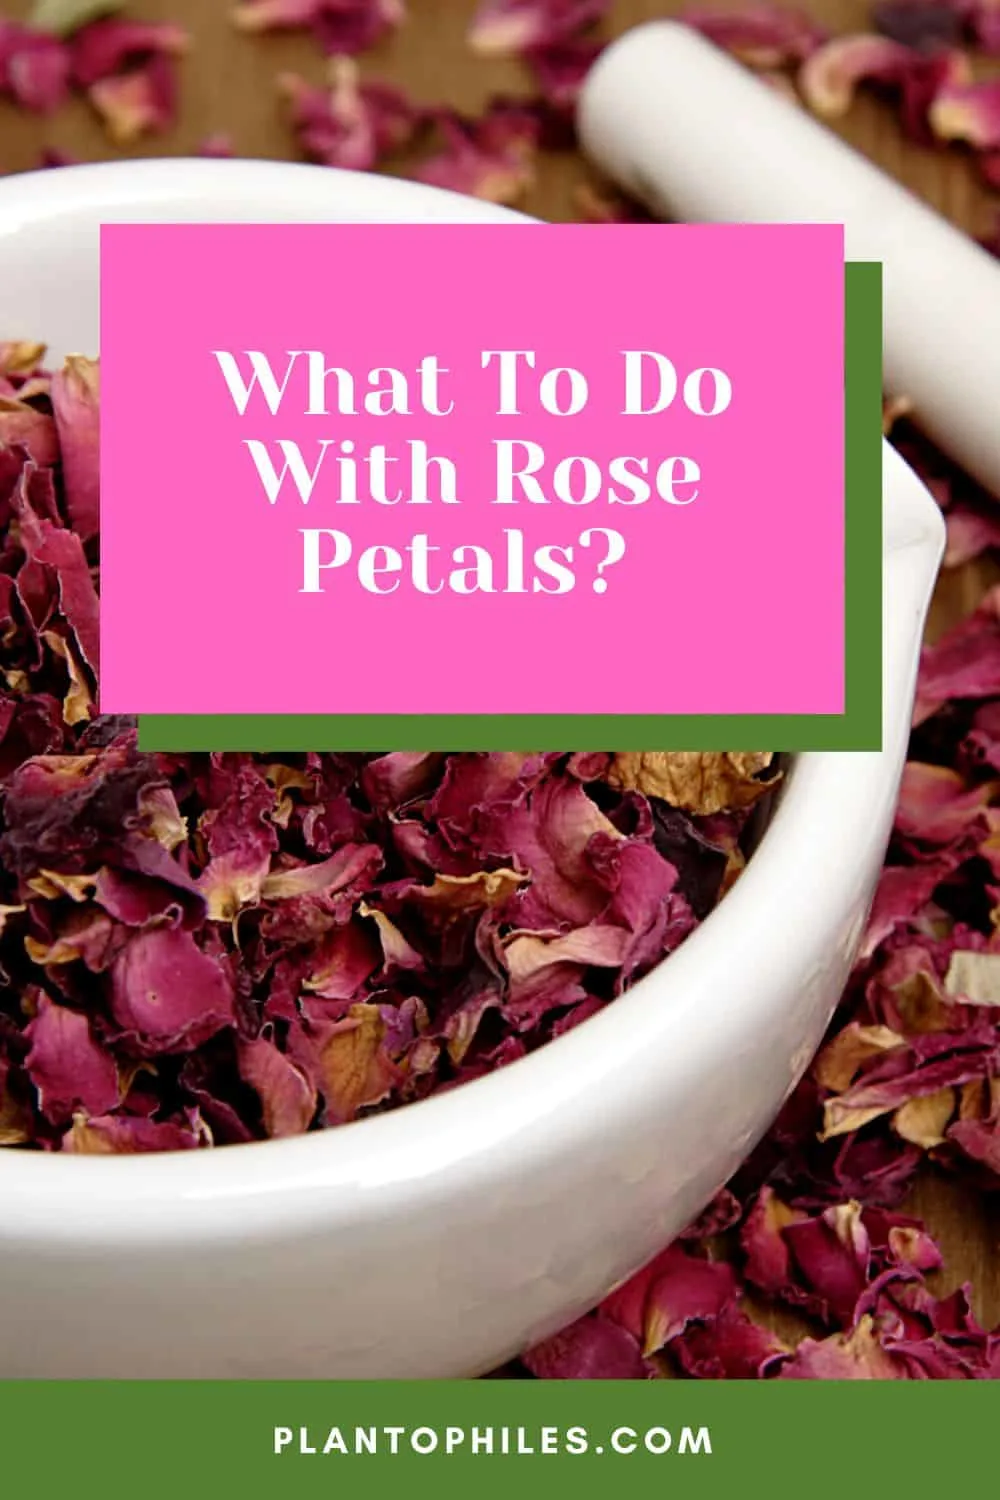 What To Do With Rose Petals?